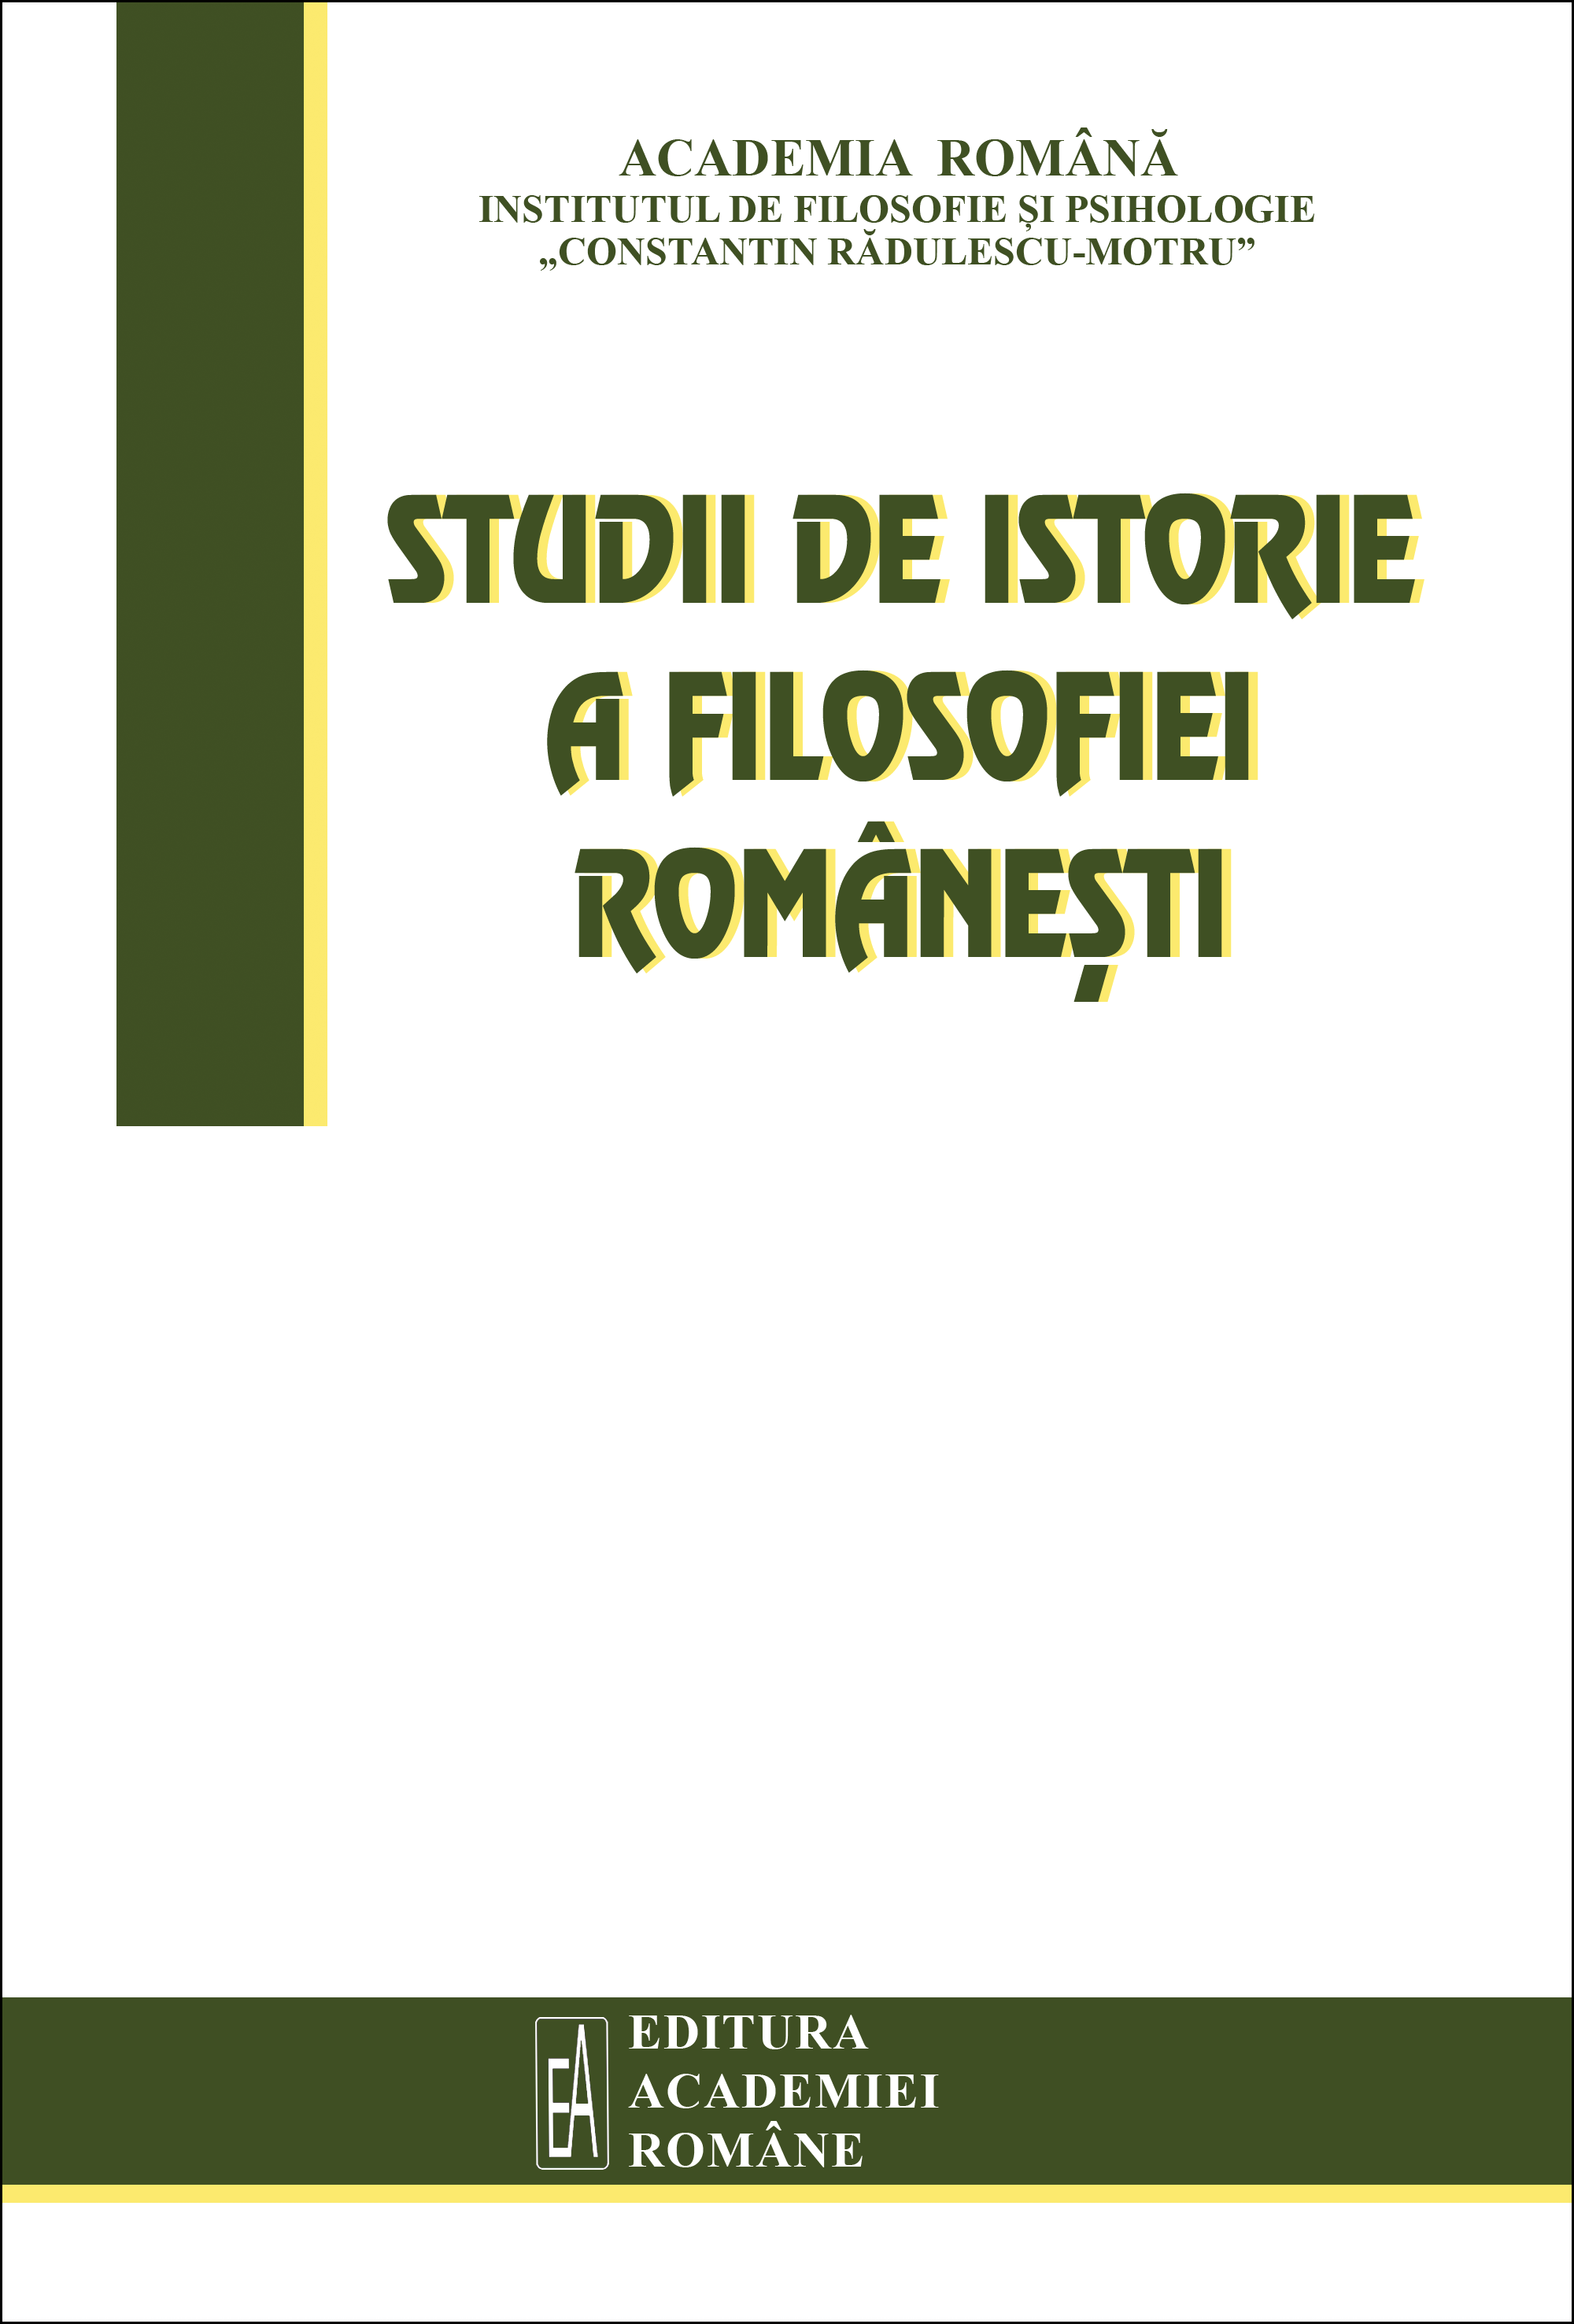 Studies on the History of Romanian Philosophy